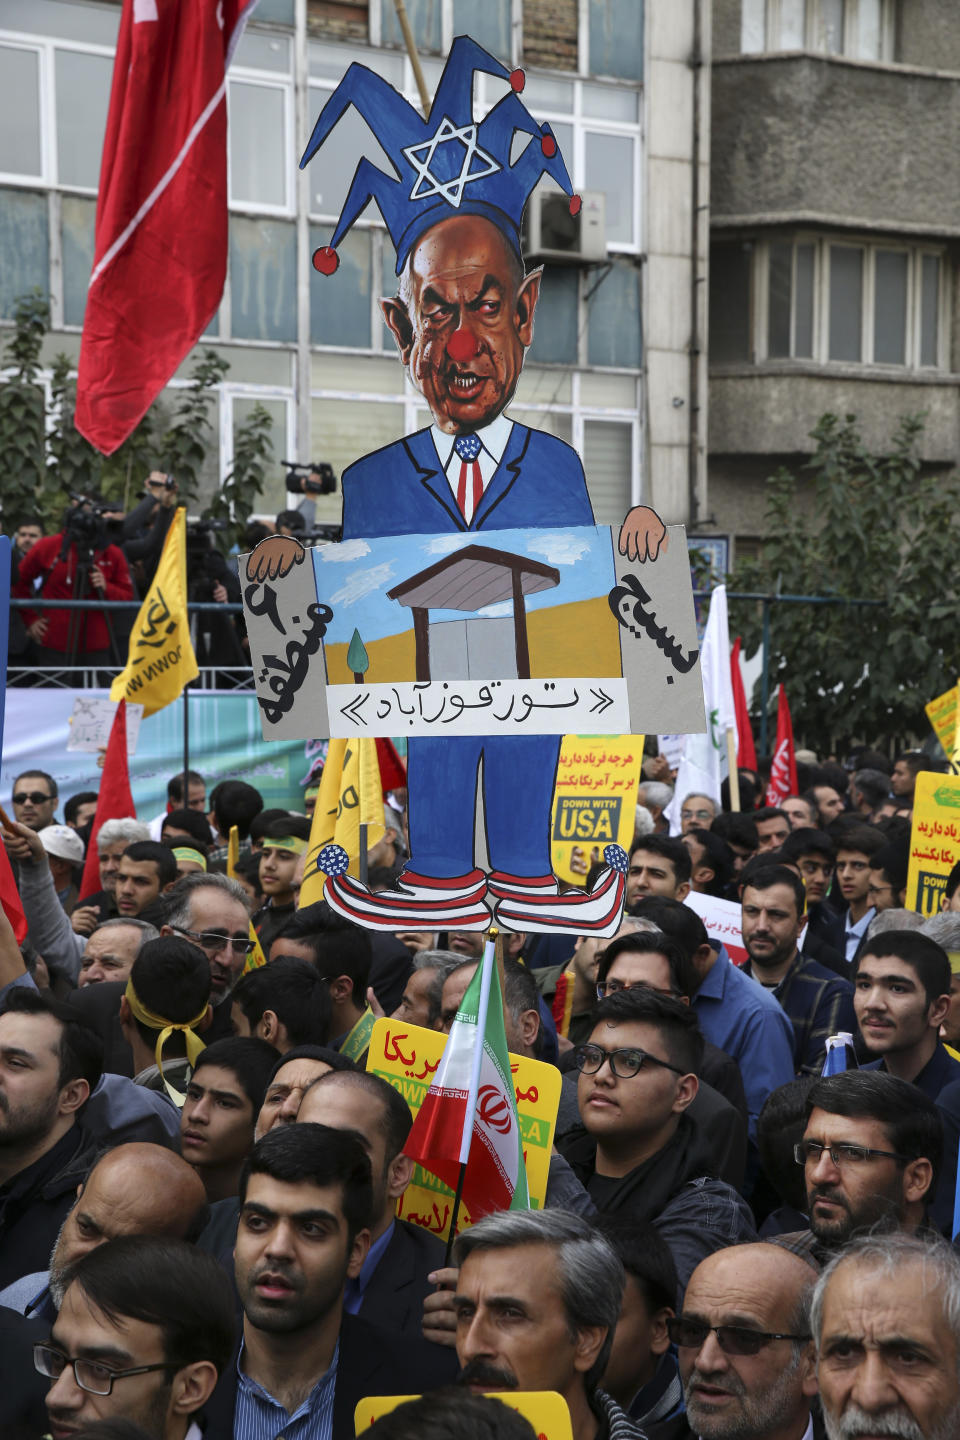 A demonstrator holds up a caricature of Israeli Prime Minister Benjamin Netanyahu during a rally in front of the former U.S. Embassy in Tehran, Iran, on Sunday, Nov. 4, 2018, marking the 39th anniversary of the seizure of the embassy by militant Iranian students. Thousands of Iranians rallied in Tehran on Sunday to mark the anniversary as Washington restored all sanctions lifted under the nuclear deal. (AP Photo/Vahid Salemi)